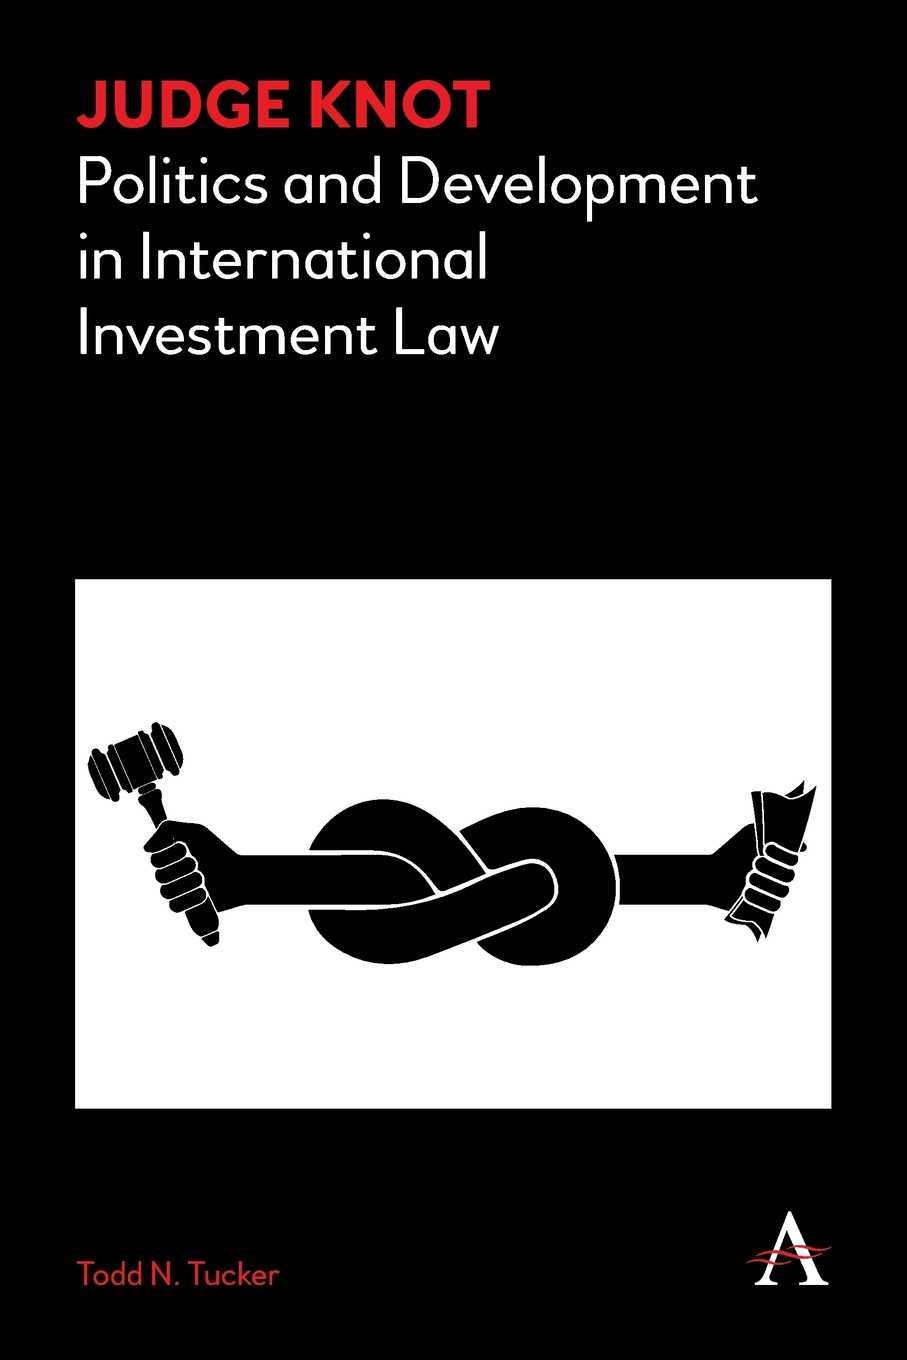 Judge Knot. Politics and Development in International Investment Law